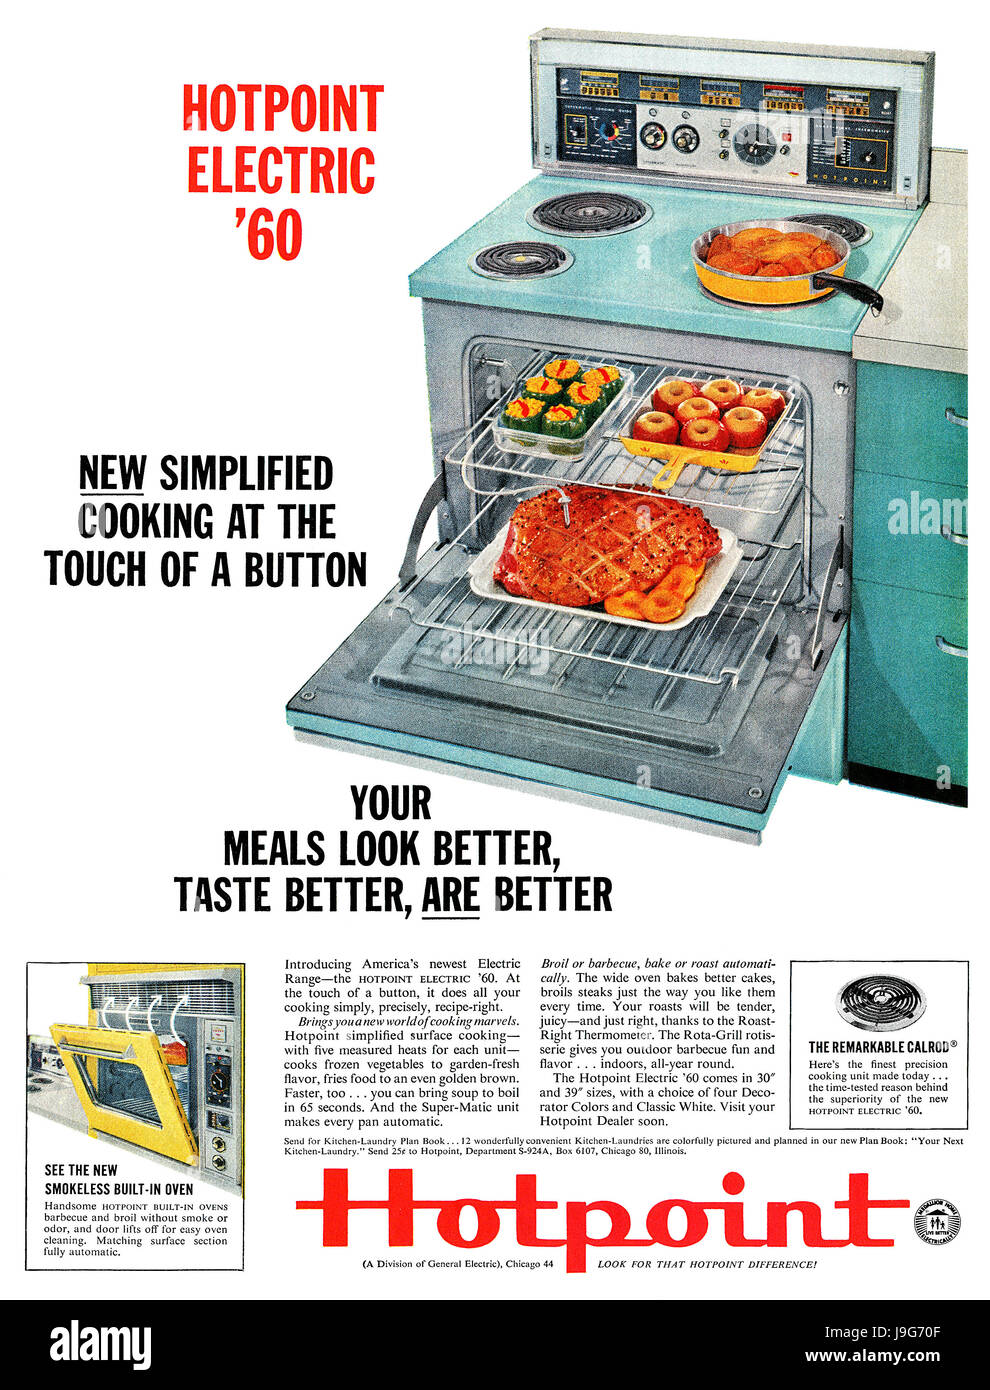 https://c8.alamy.com/comp/J9G70F/1960-us-advertisement-for-hotpoint-electric-cookers-J9G70F.jpg